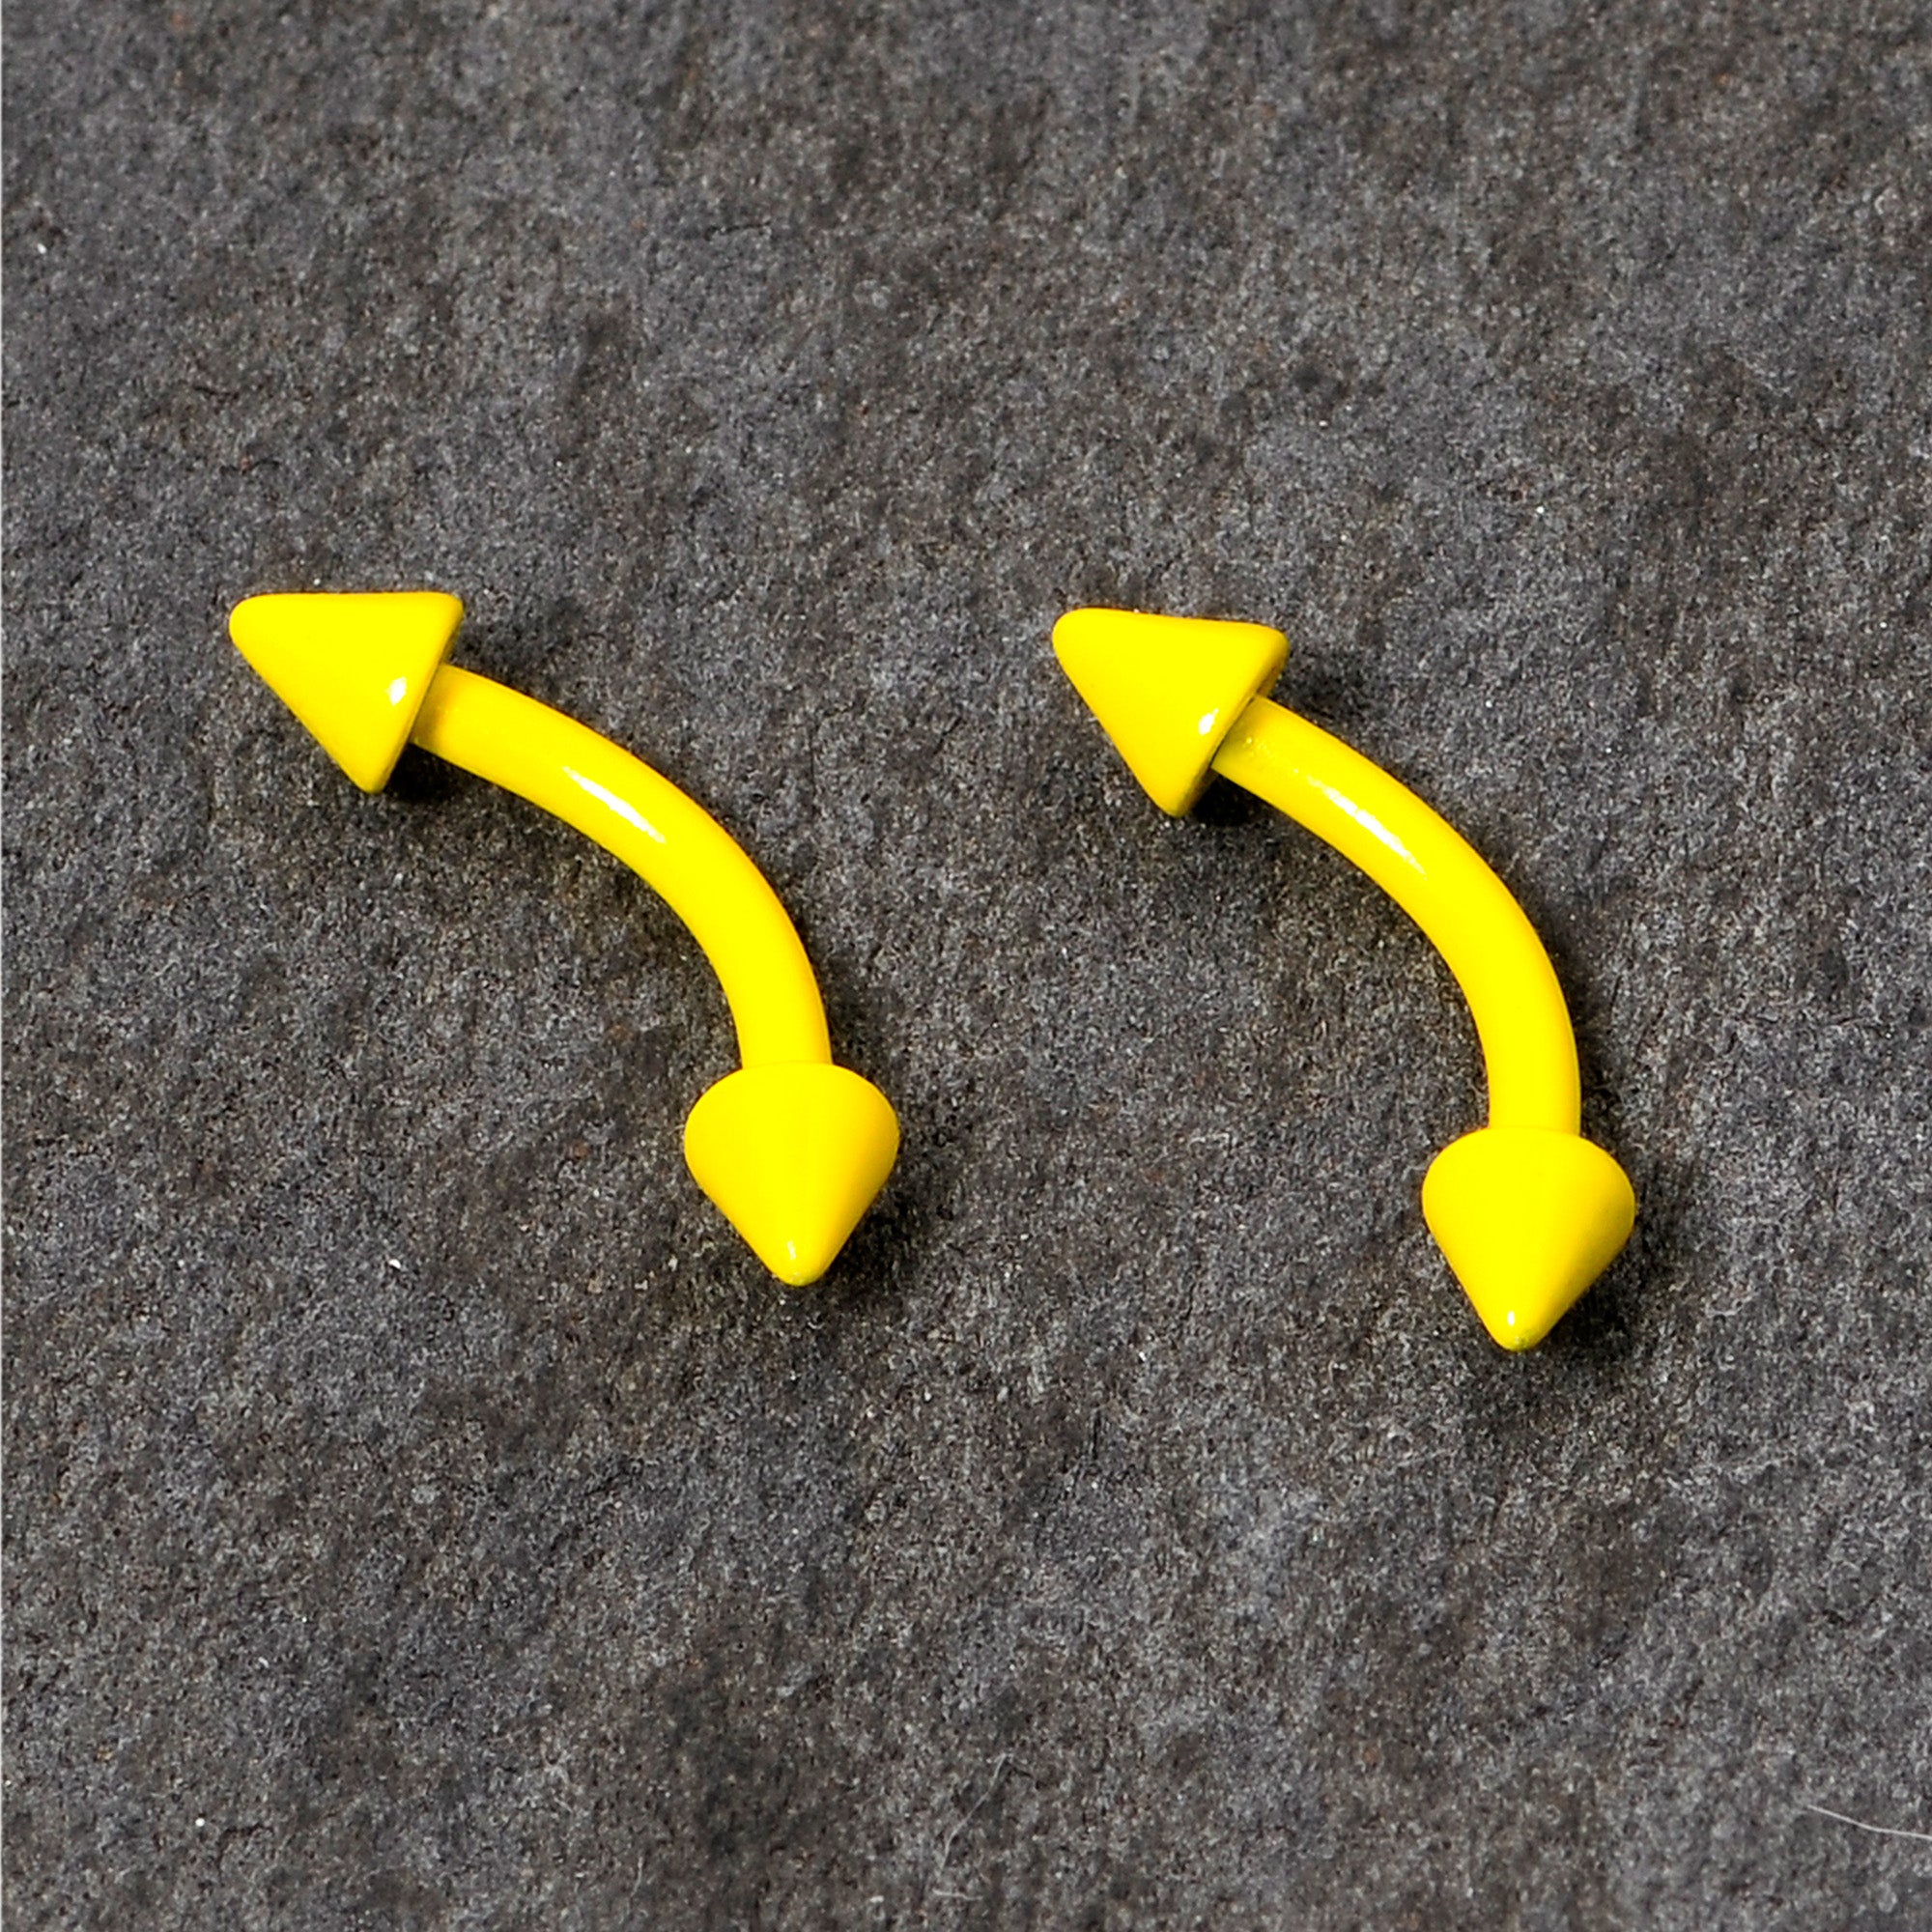 16 Gauge 5/16 Yellow Glow in the Dark Cone End Curved Barbell Set of 2